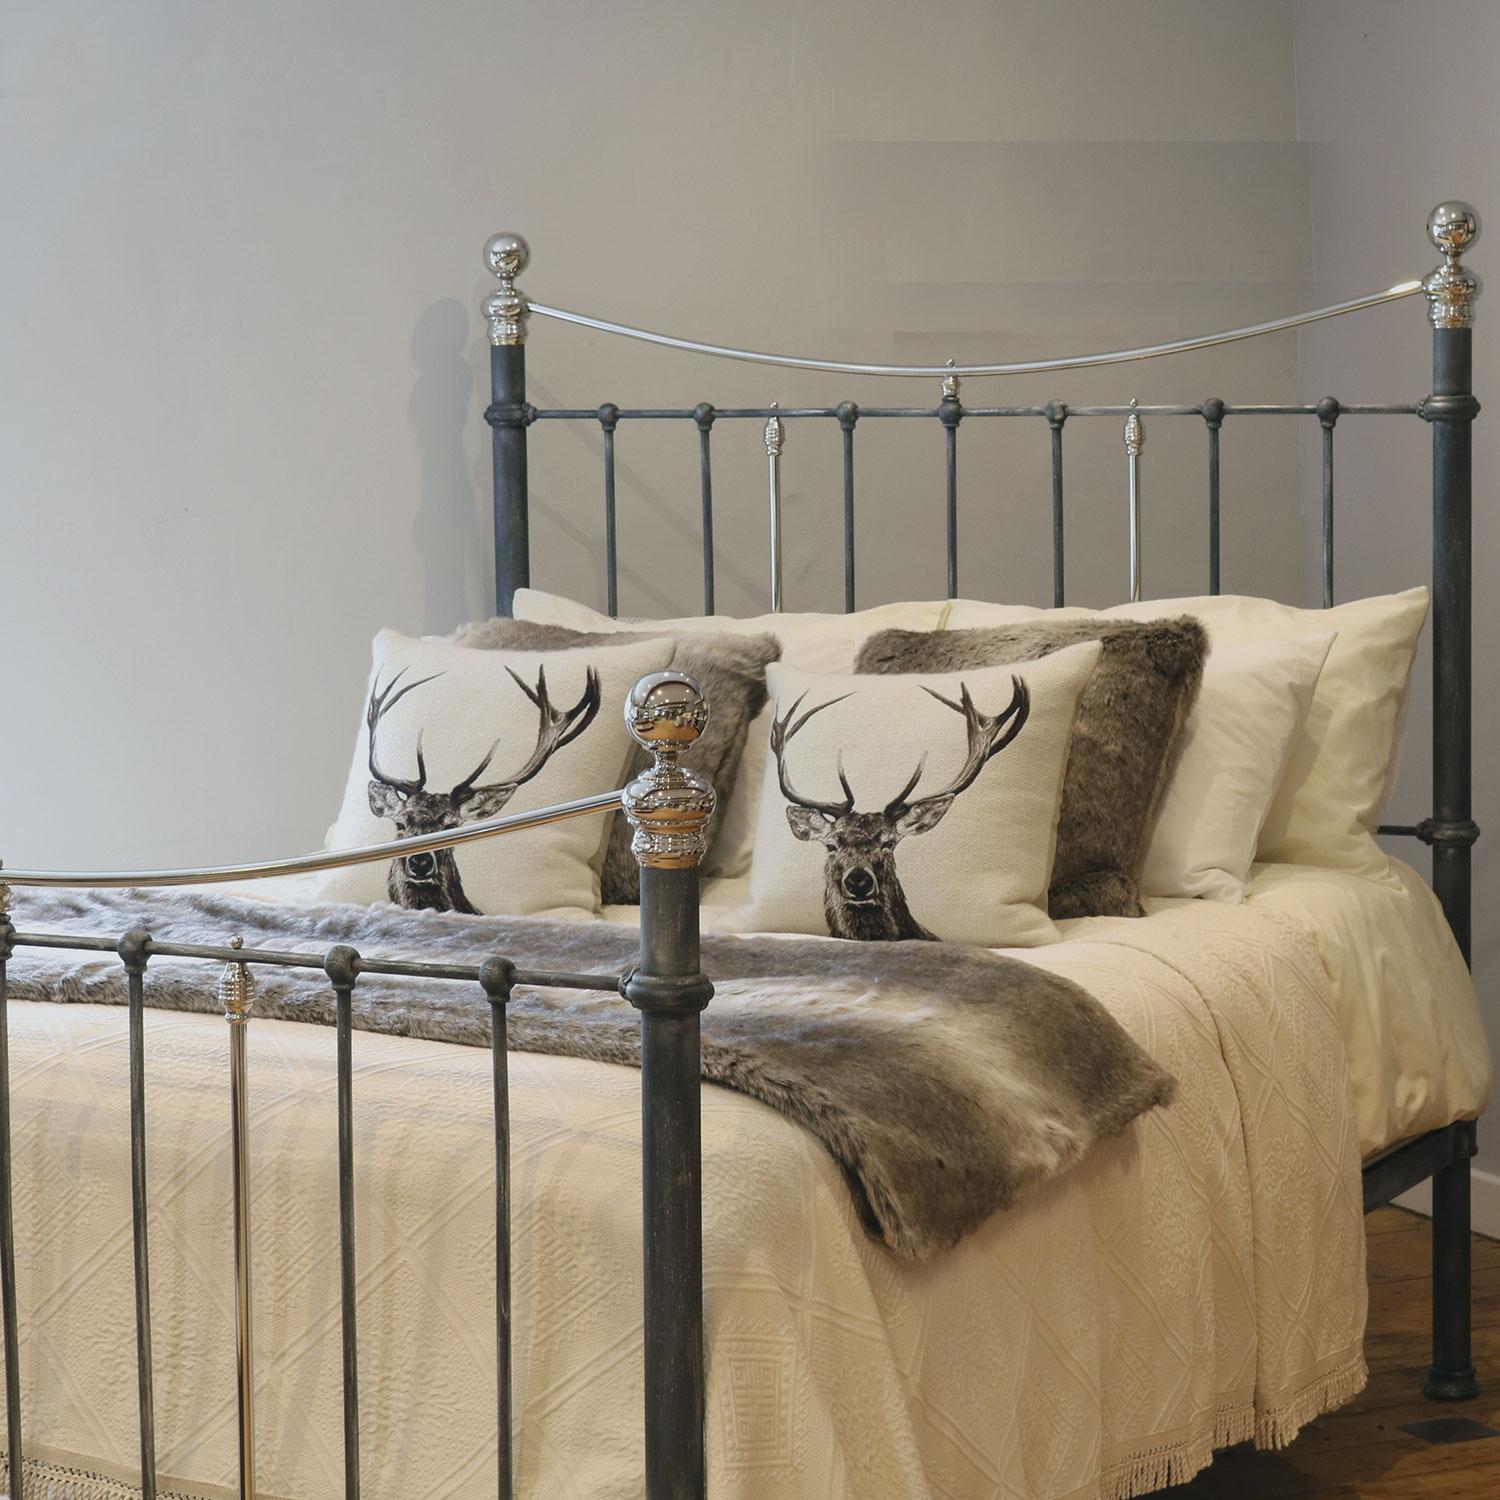 A simple cast iron Victorian bedstead finished in charcoal with nickel plated rails, knobs and collars, and simple round mouldings in a classic style. 

This bed accepts a UK king size or US queen size (5ft, 60in or 150cm wide) base and mattress